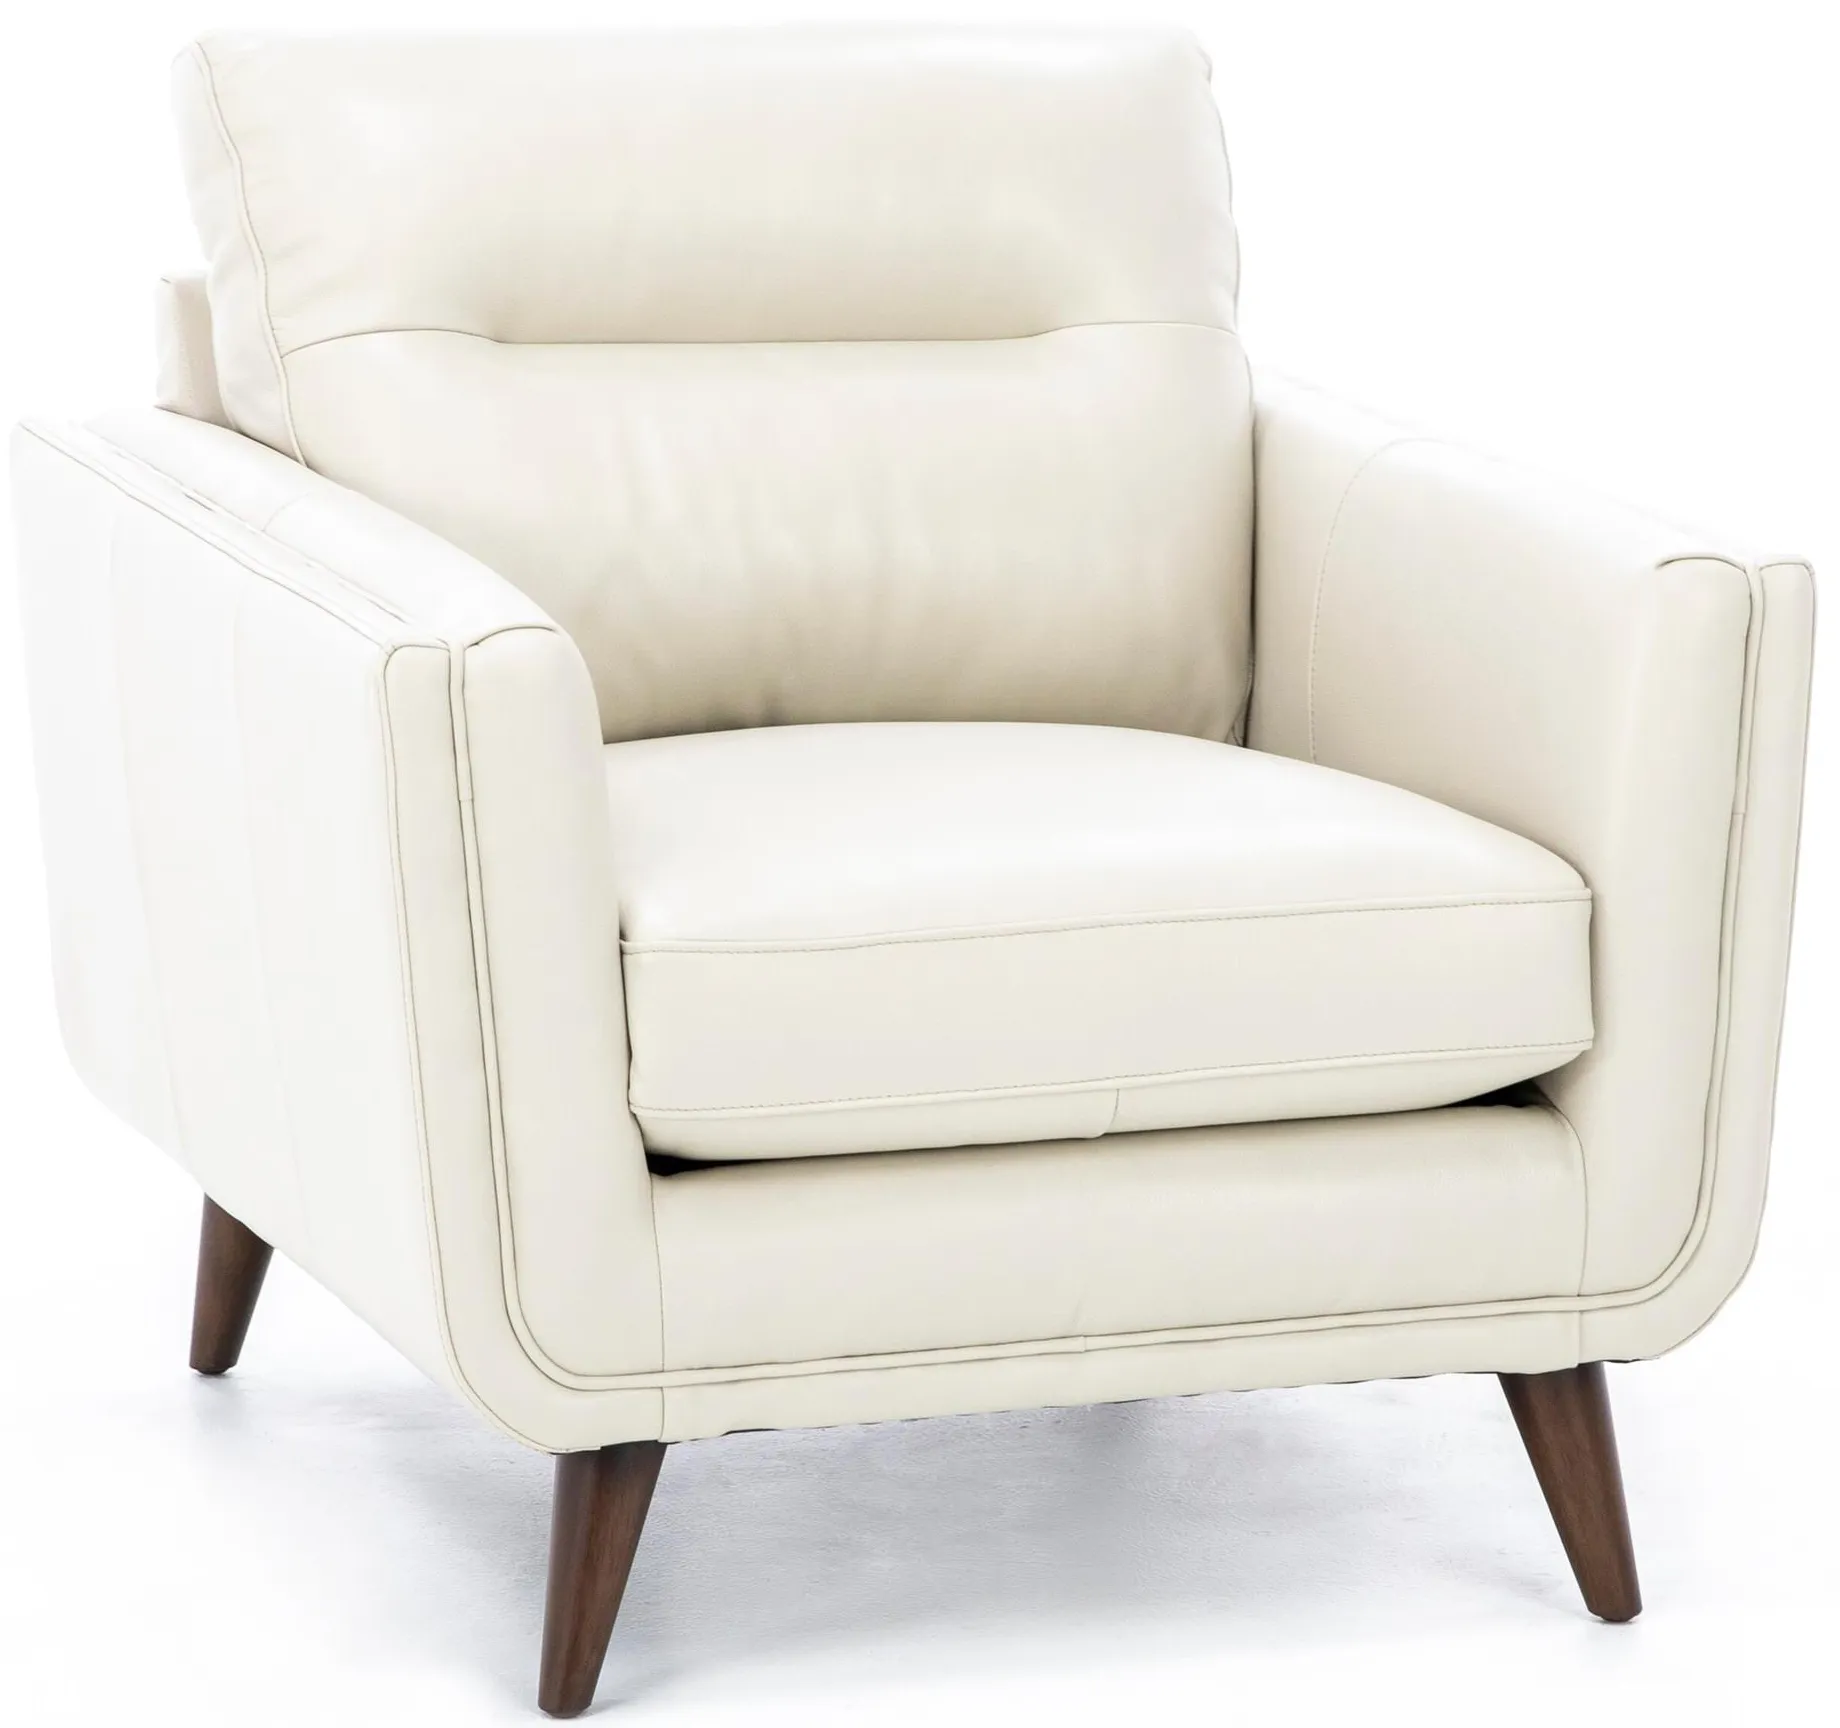 Naomi Leather Chair in Stone